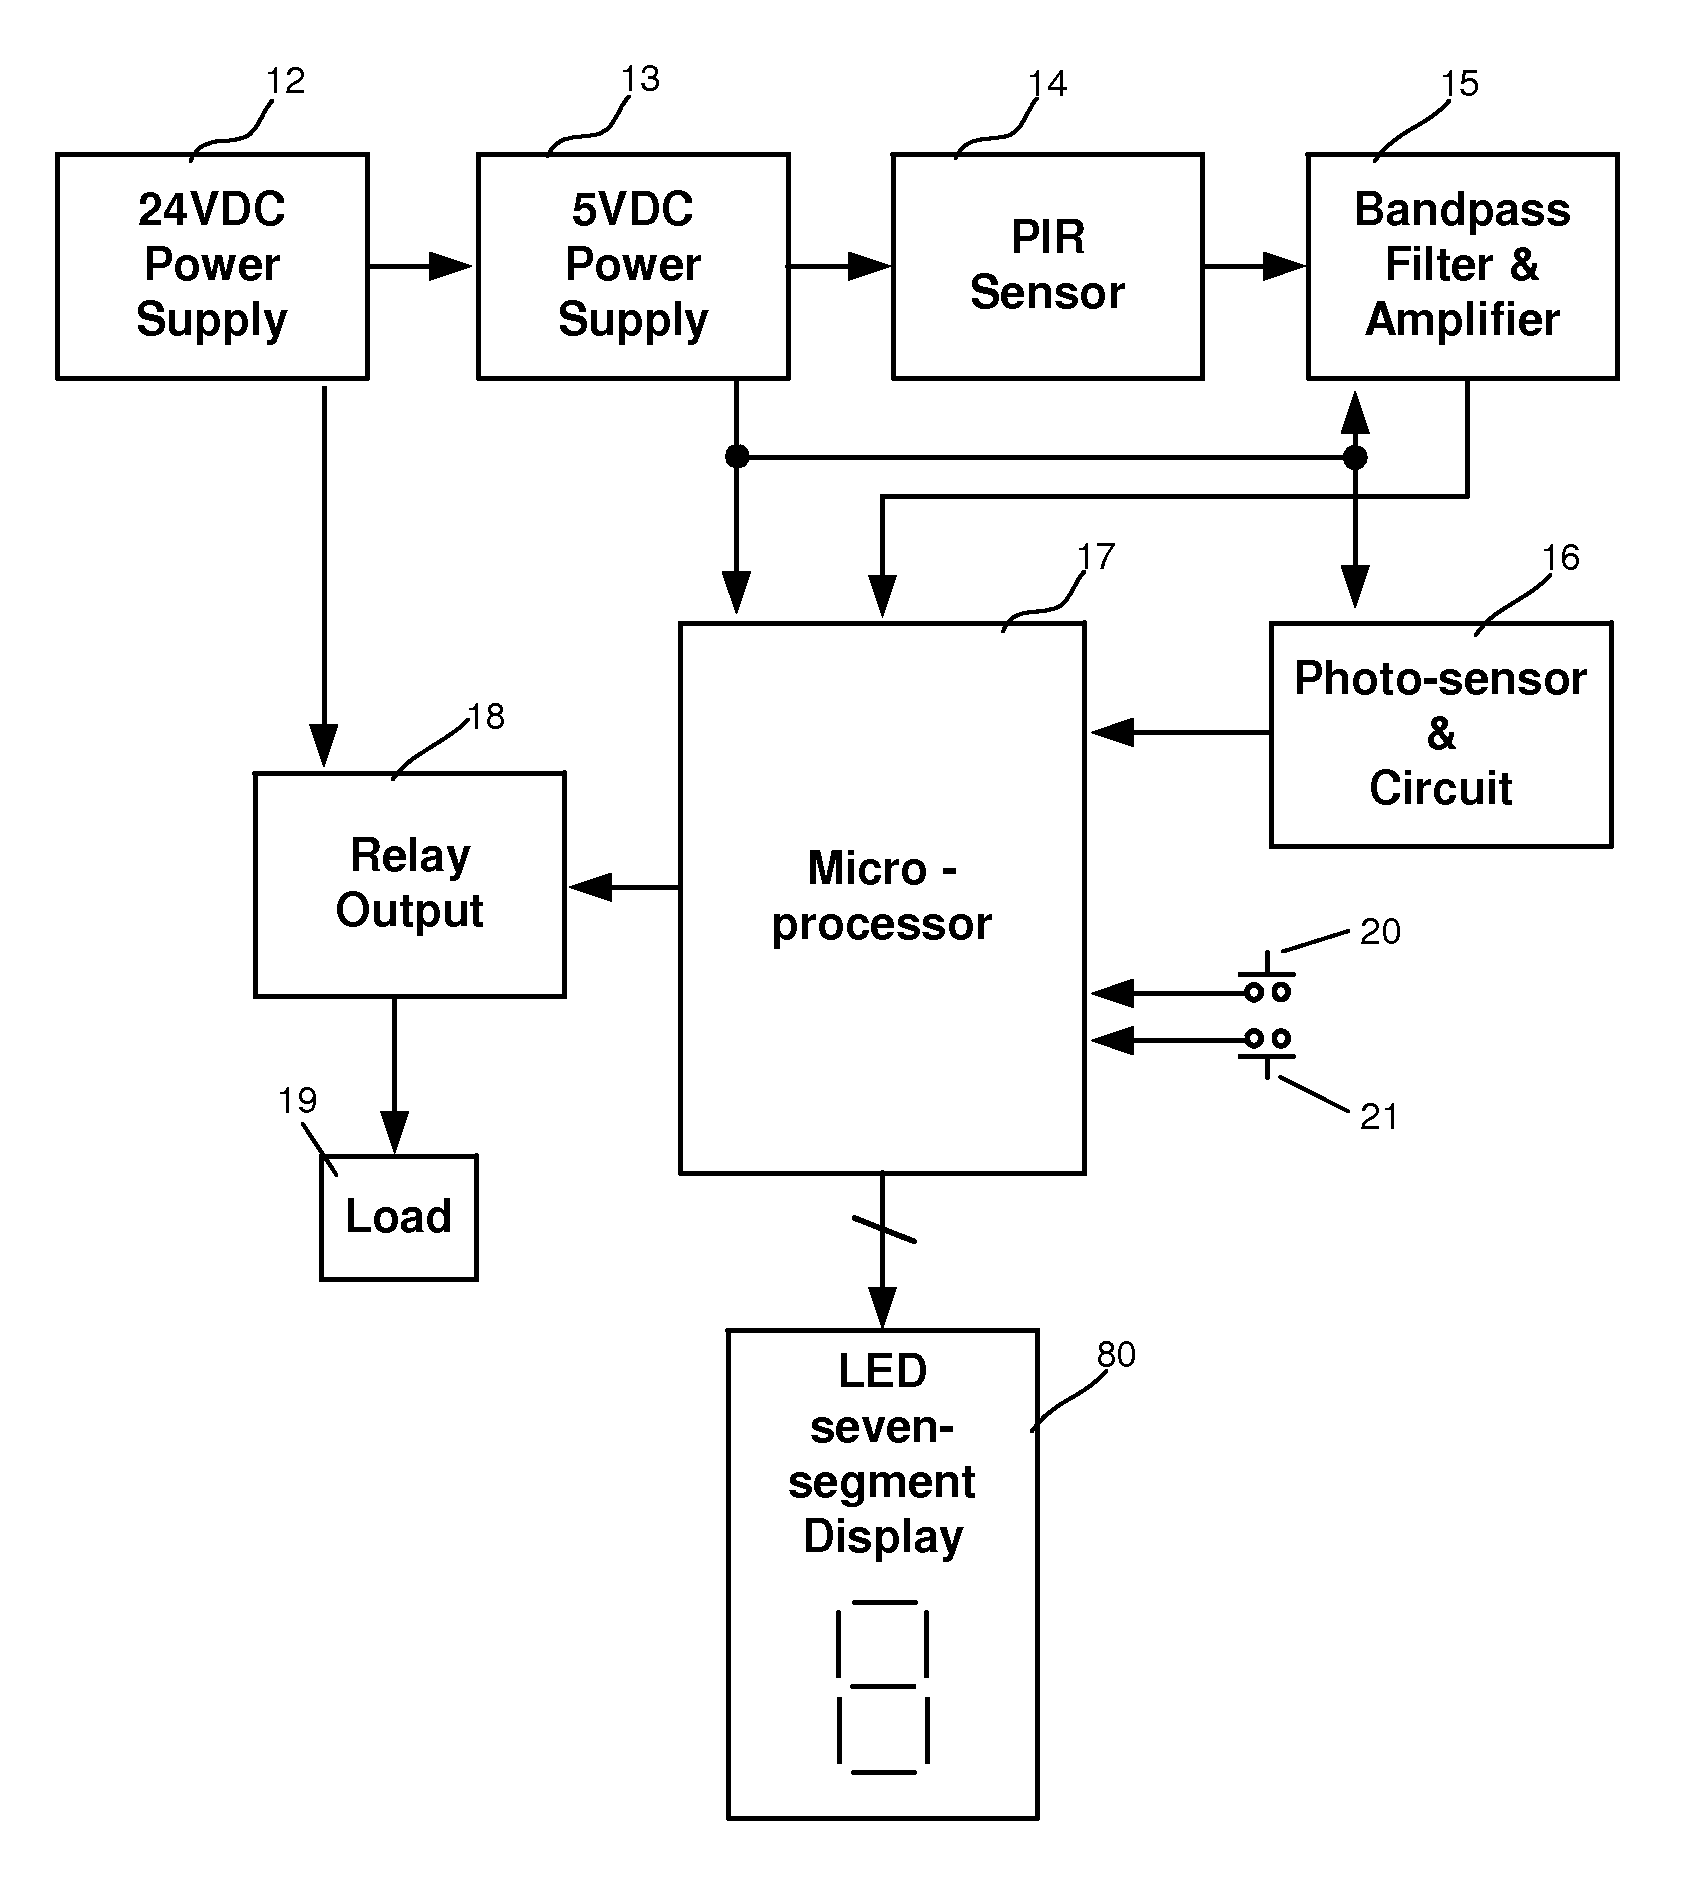 Occupant Counter Control Switch for automatic turning on and off electrical appliances in a room